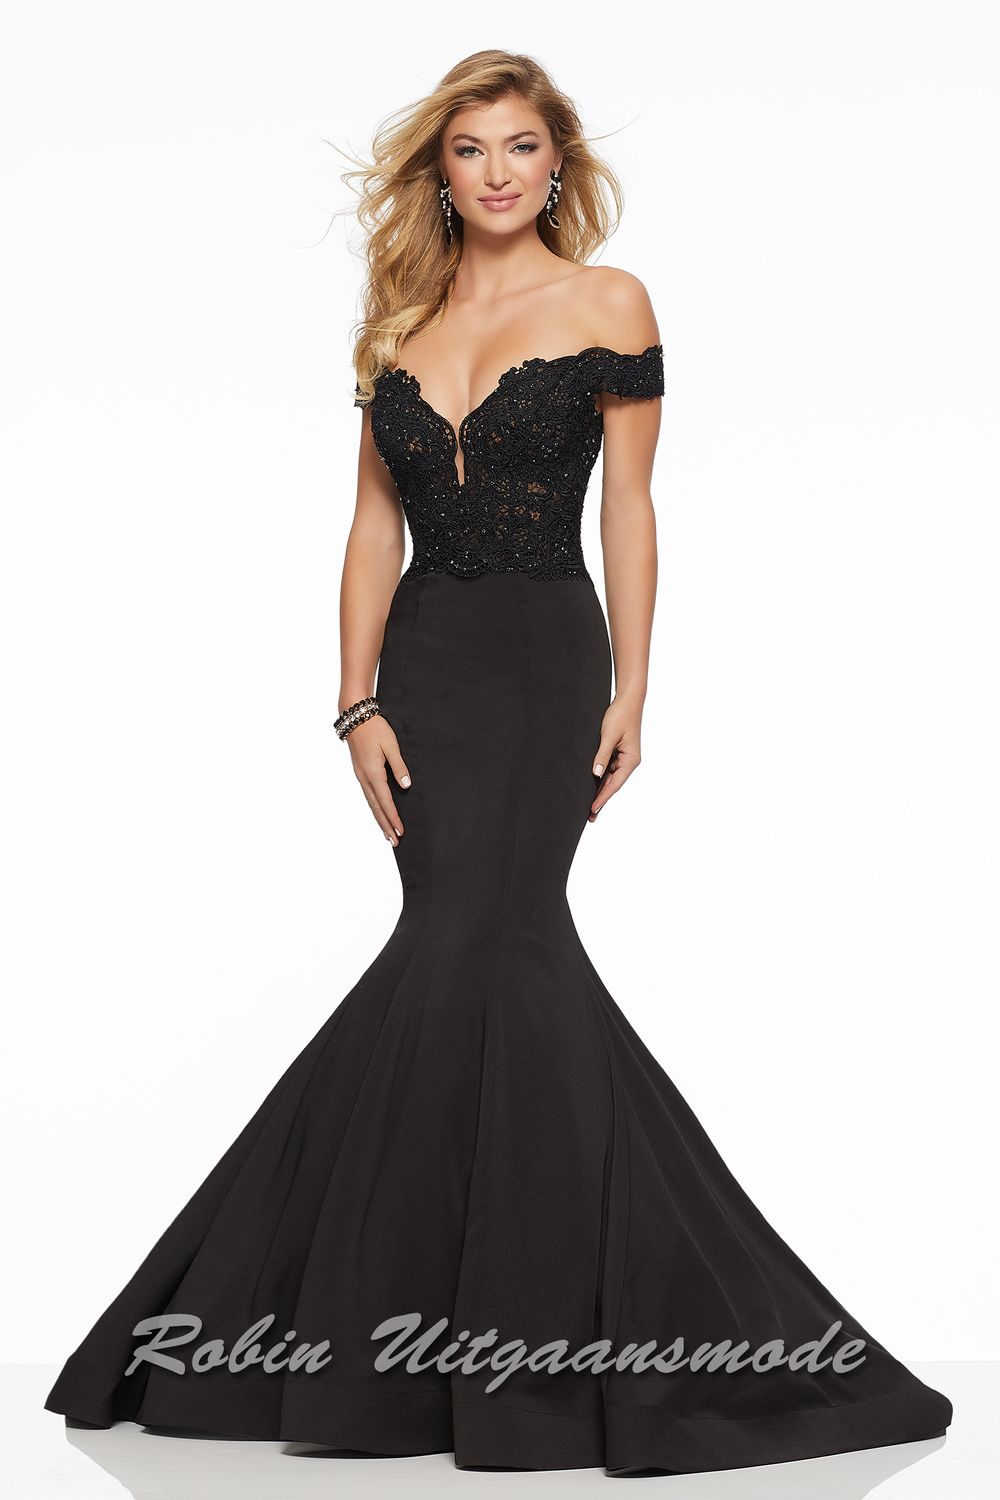 Black Off shoulder prom dress with tight figure and flared skirt